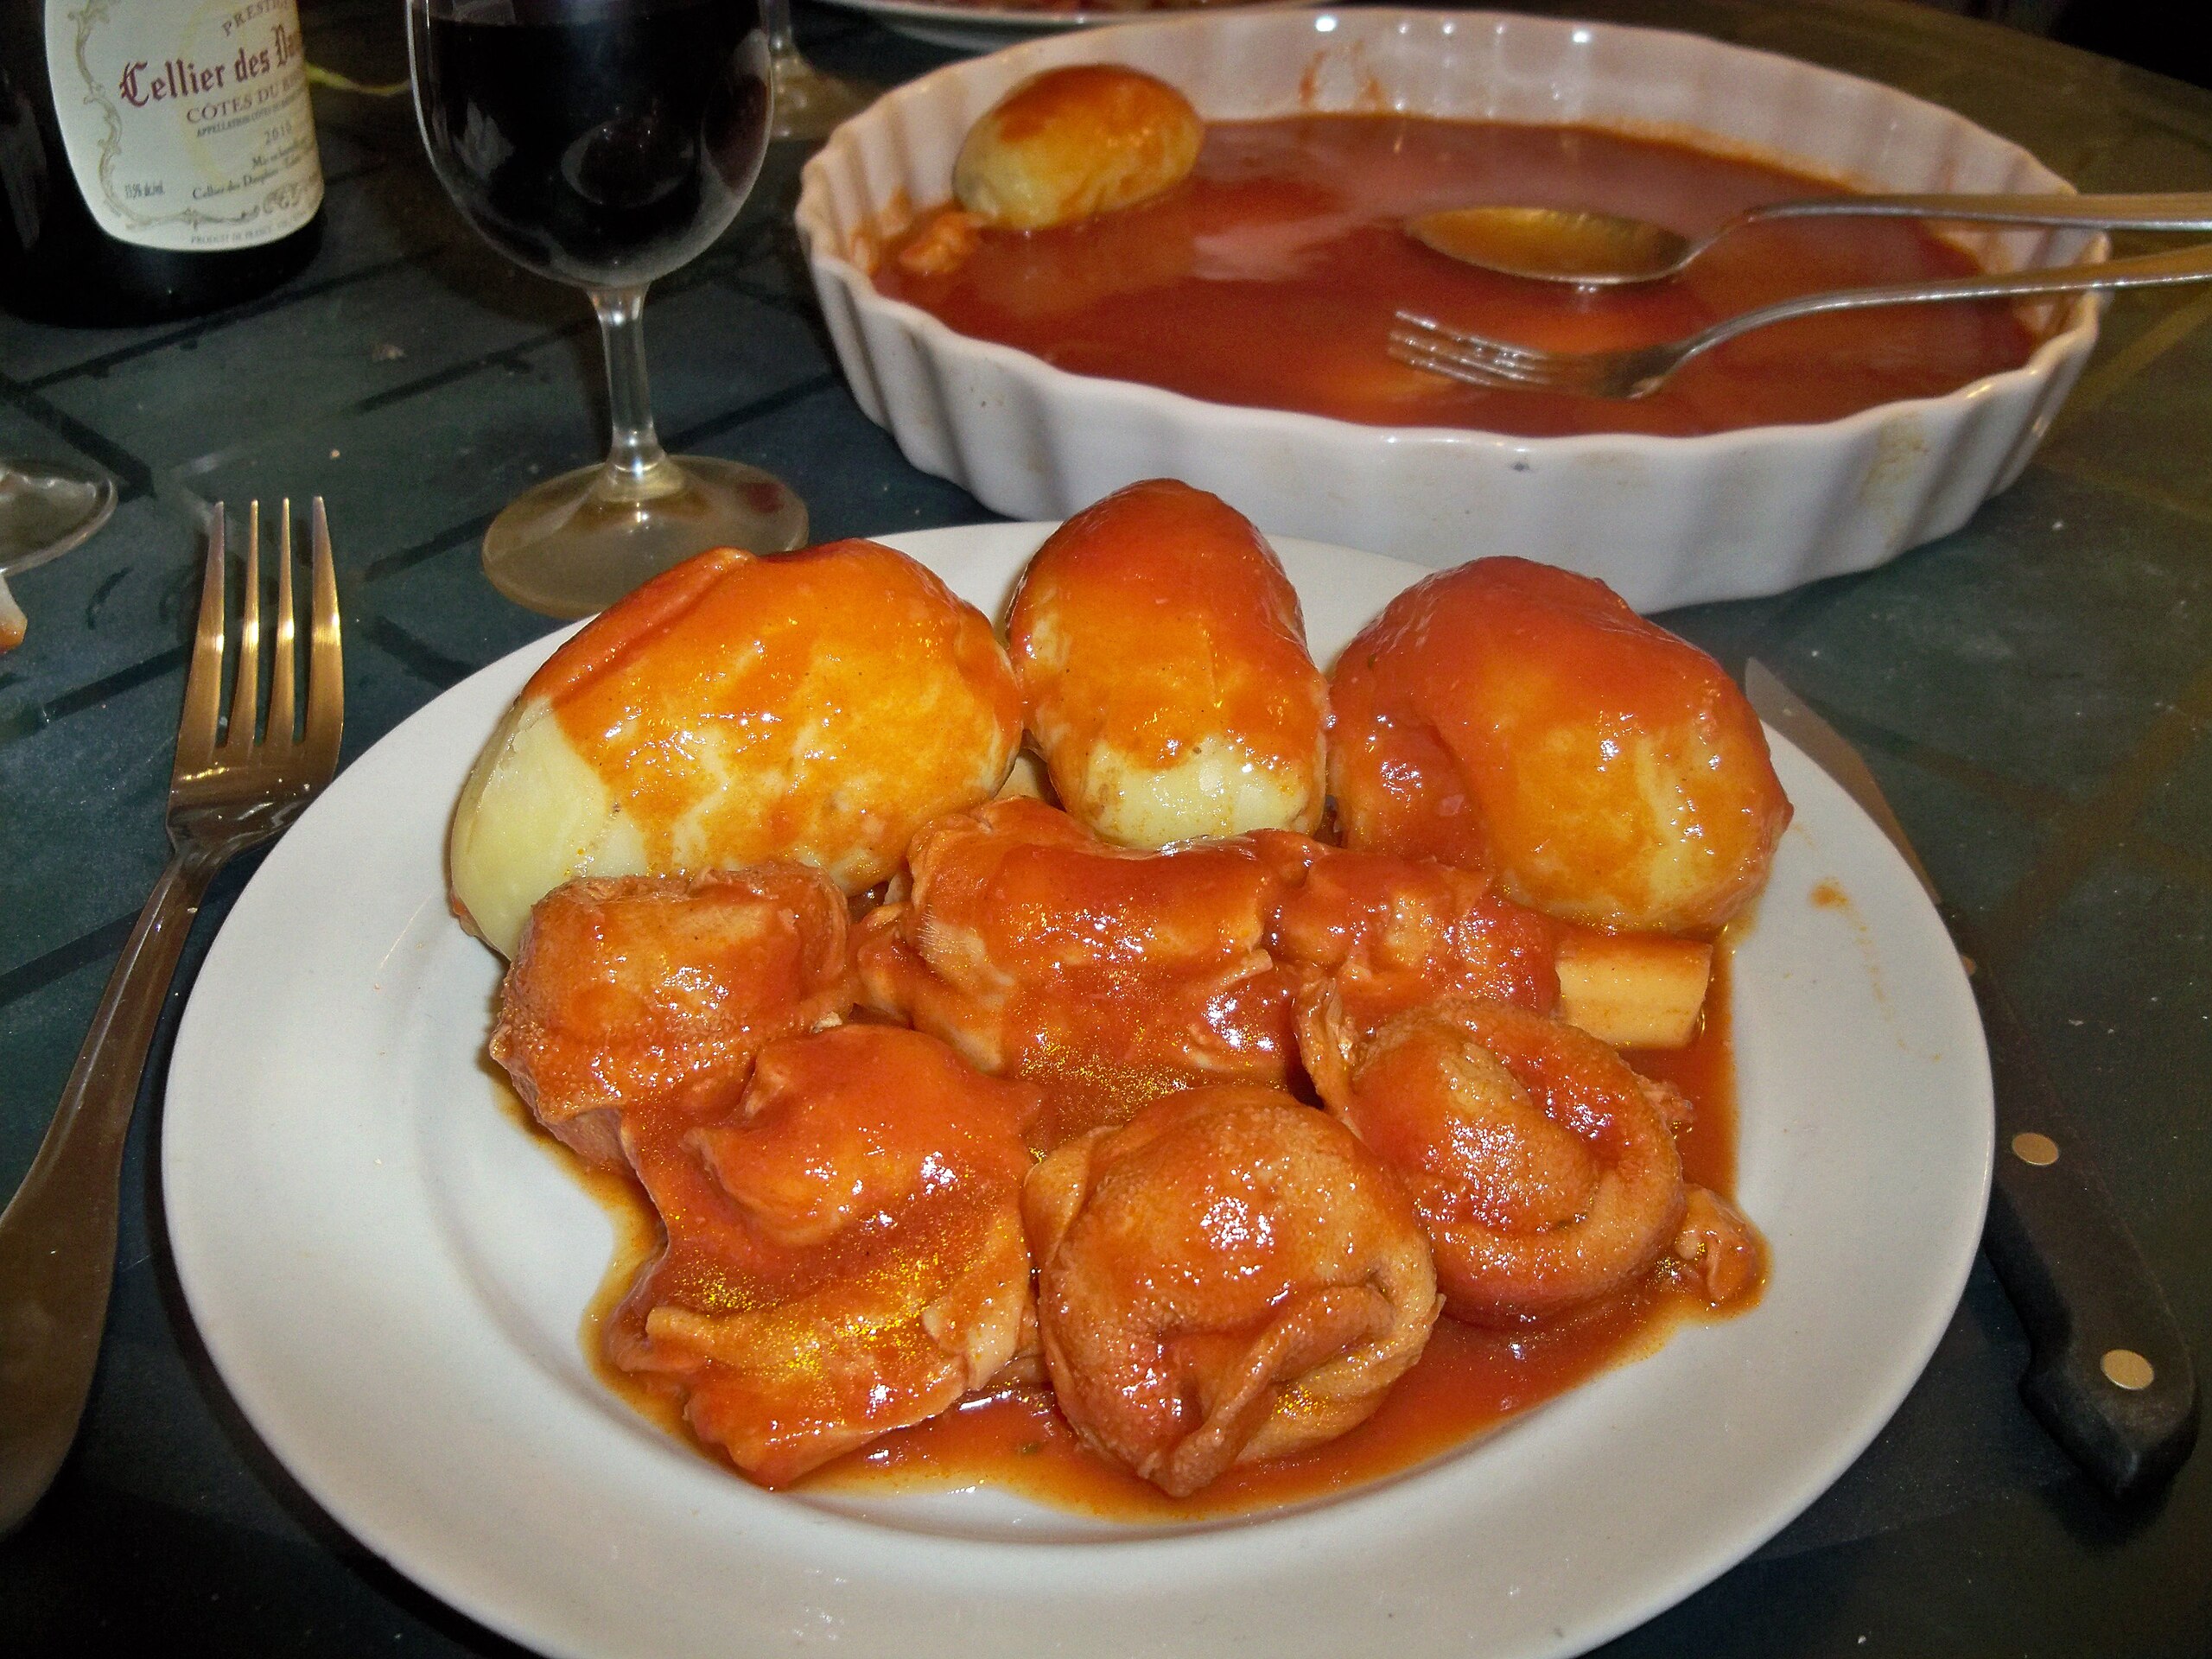 File:Pieds et paquets 2.jpg - Wikipedia